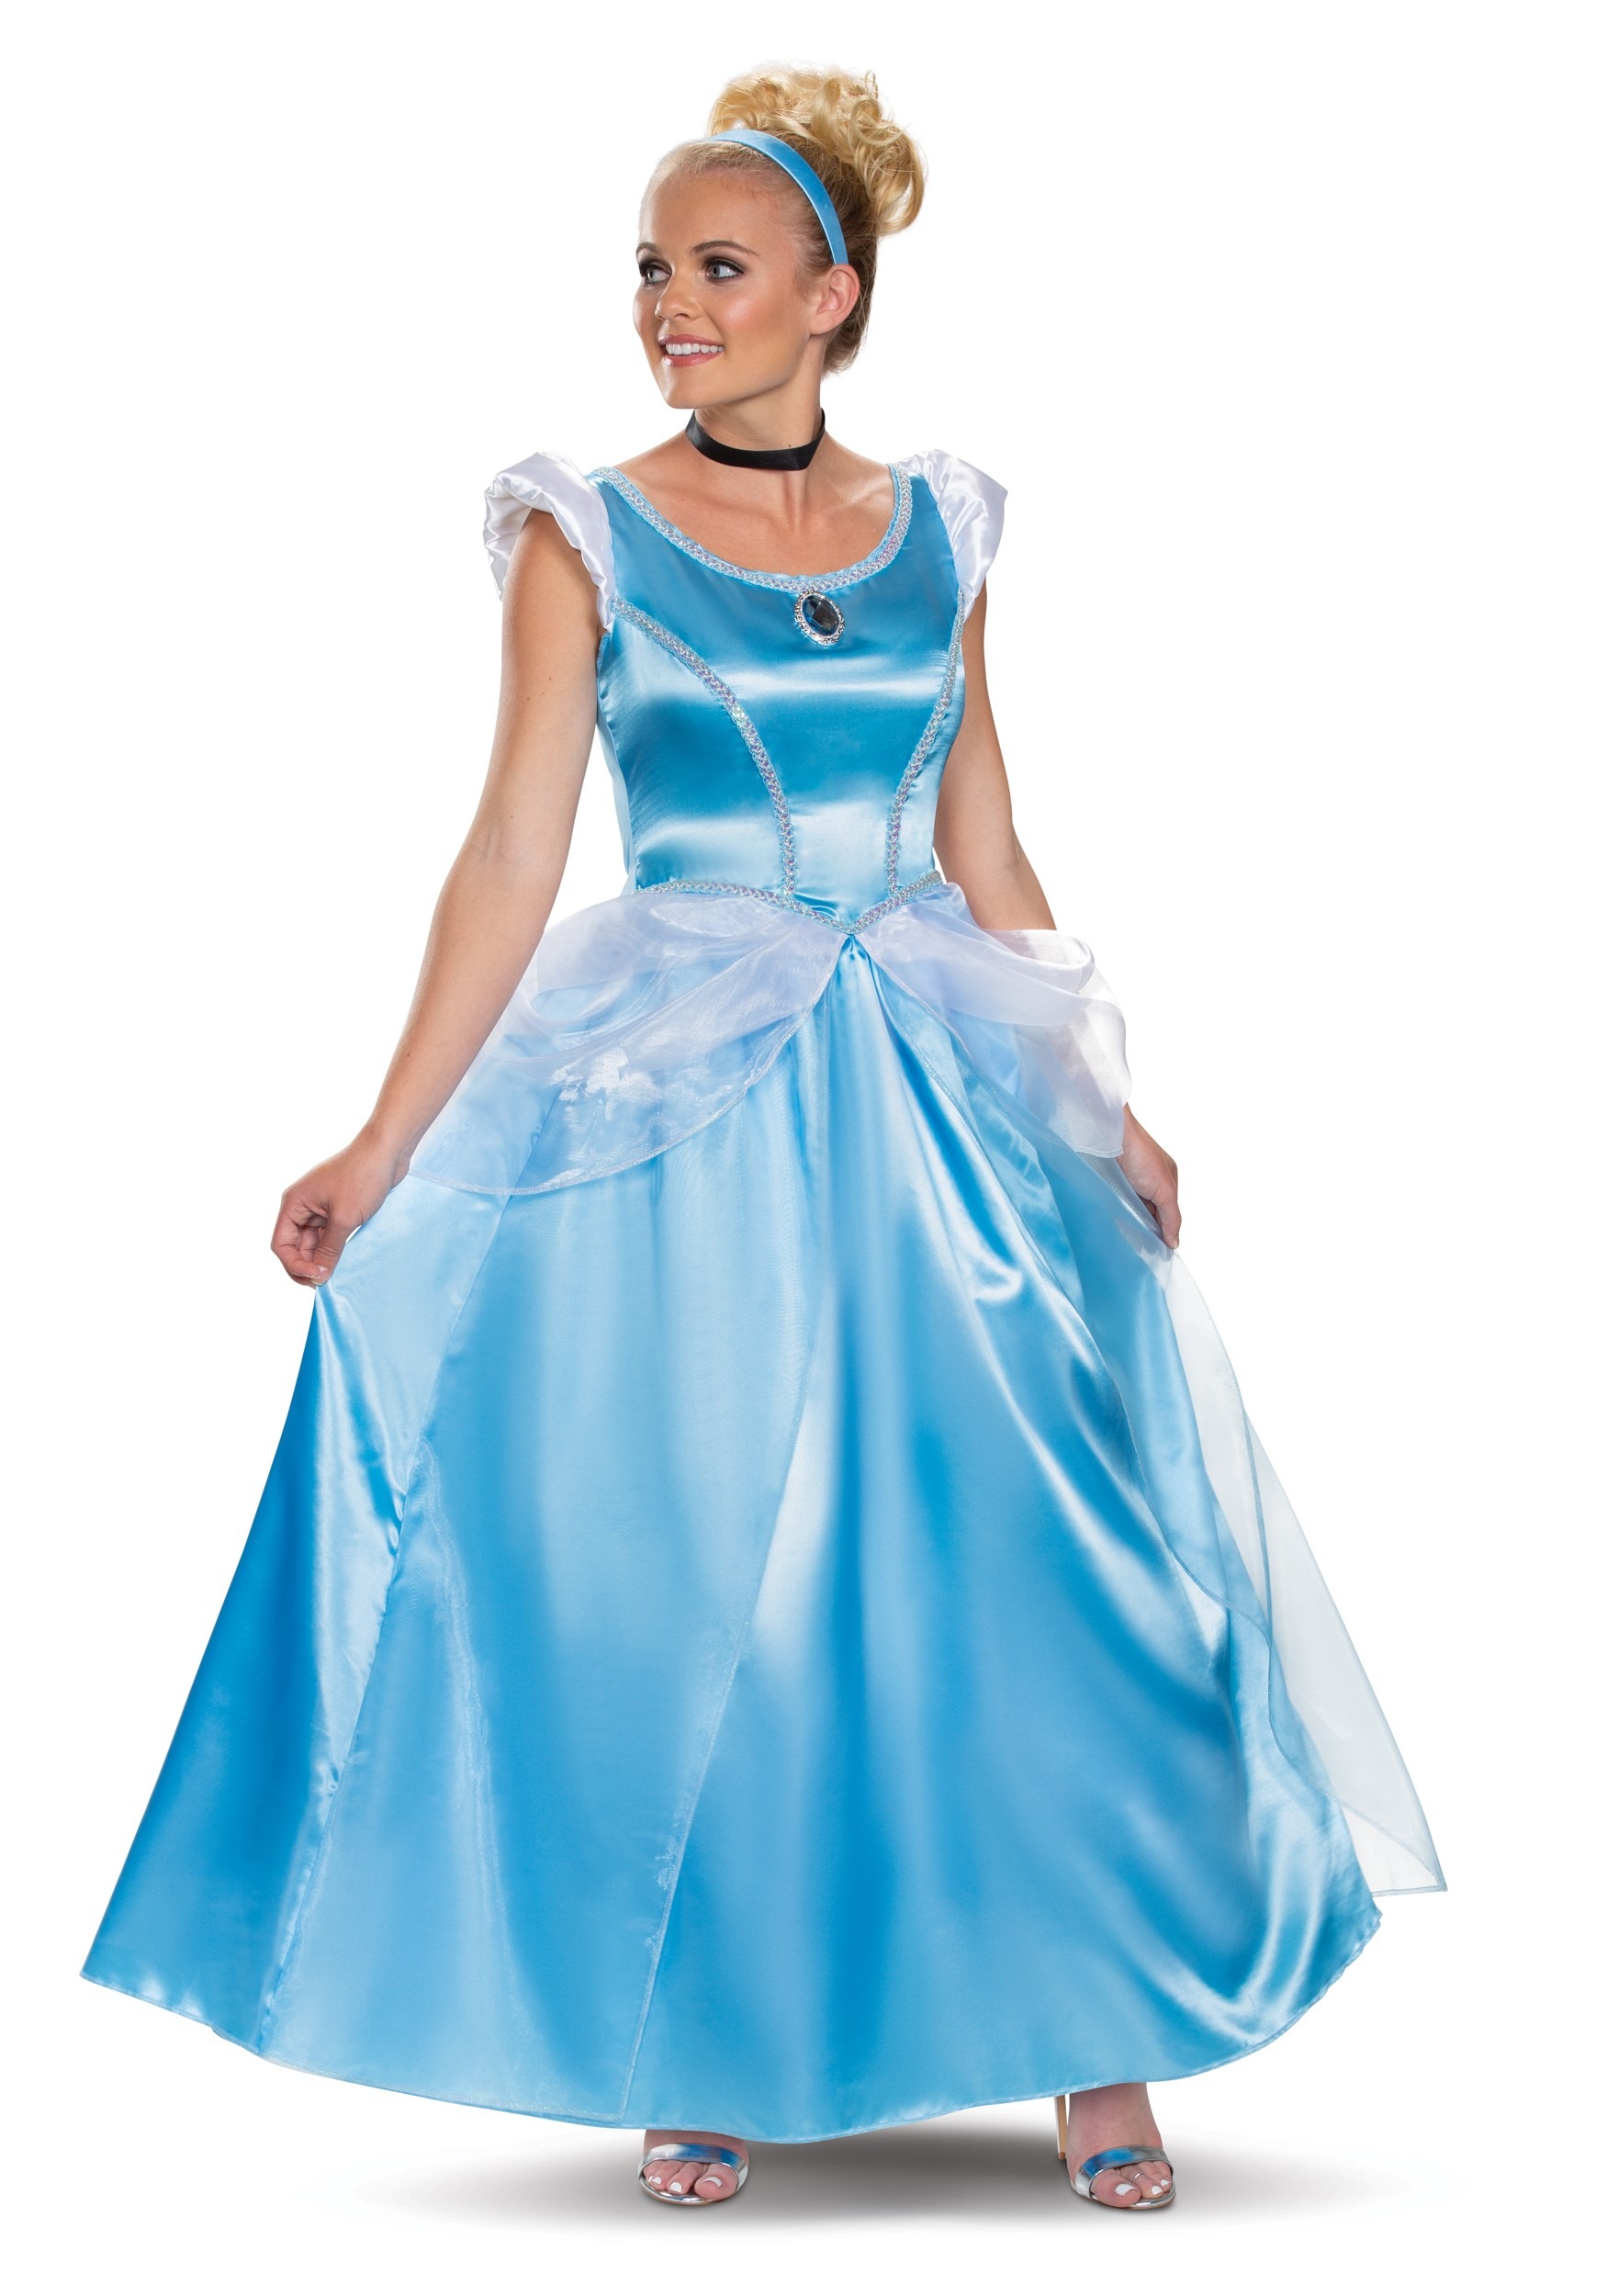 Photos - Fancy Dress Deluxe Disguise Adult  Cinderella  Costume Black/Blue/Wh 